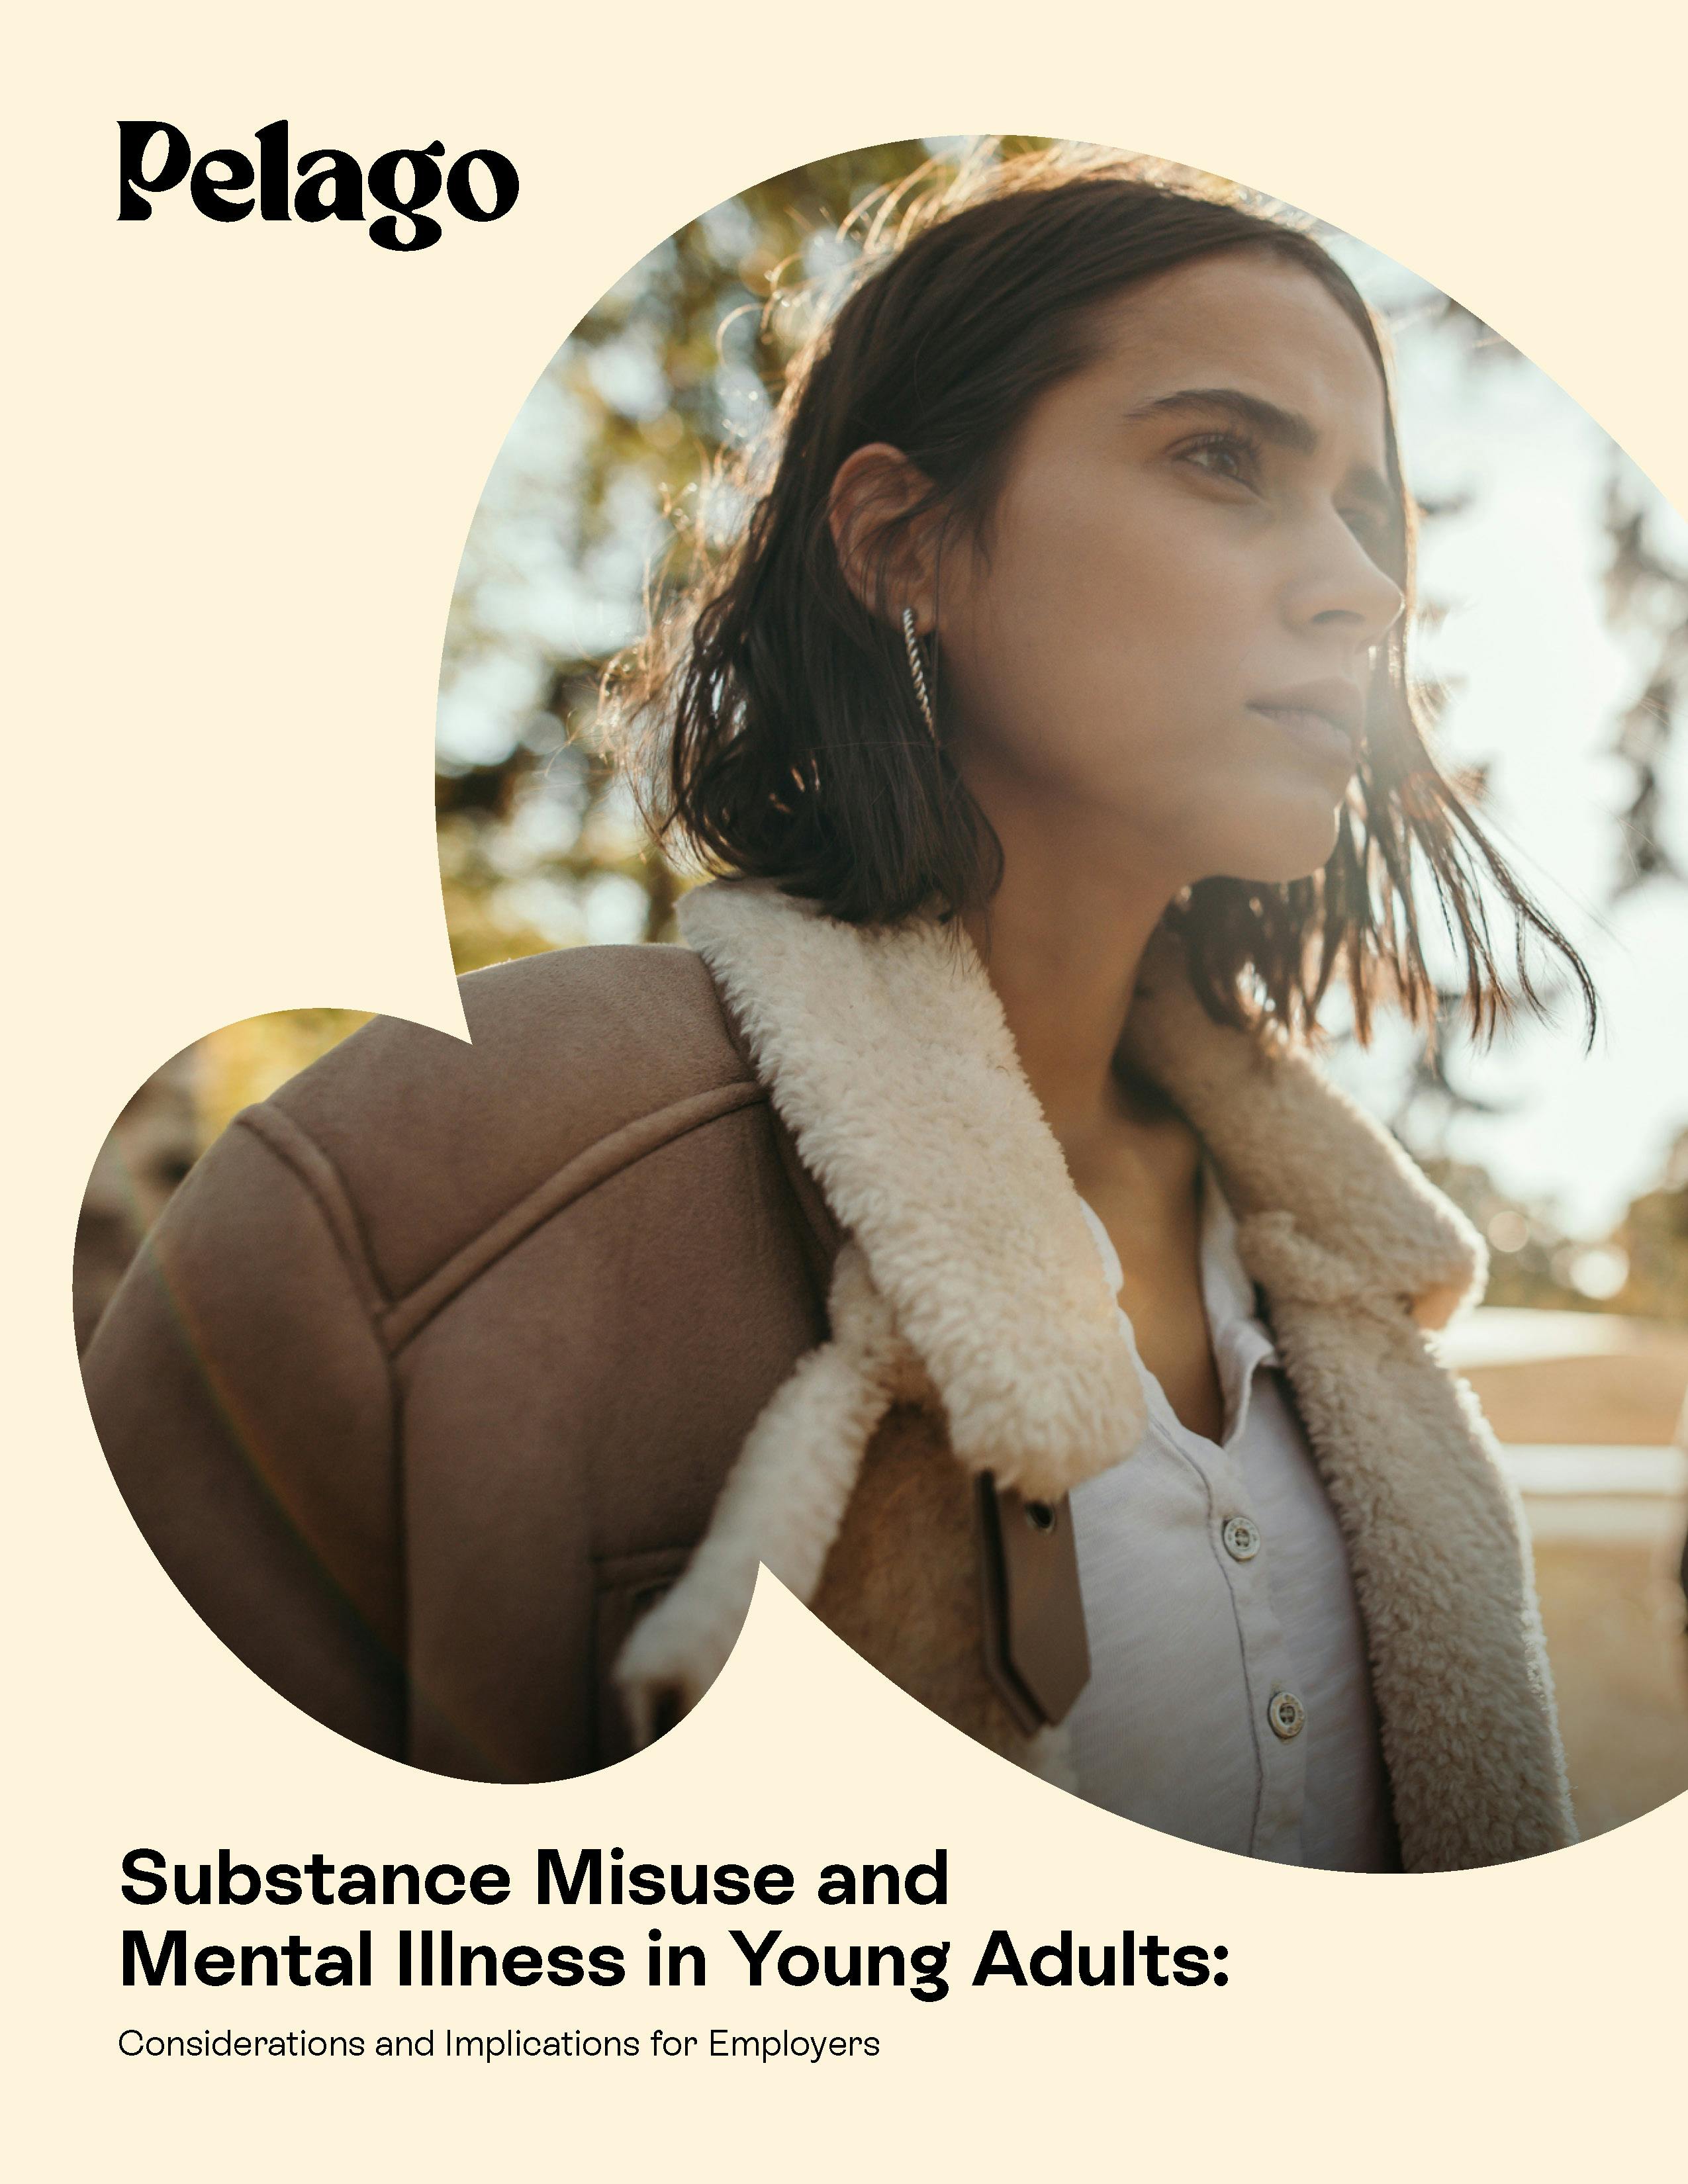 Substance misuse and mental illness in young adults